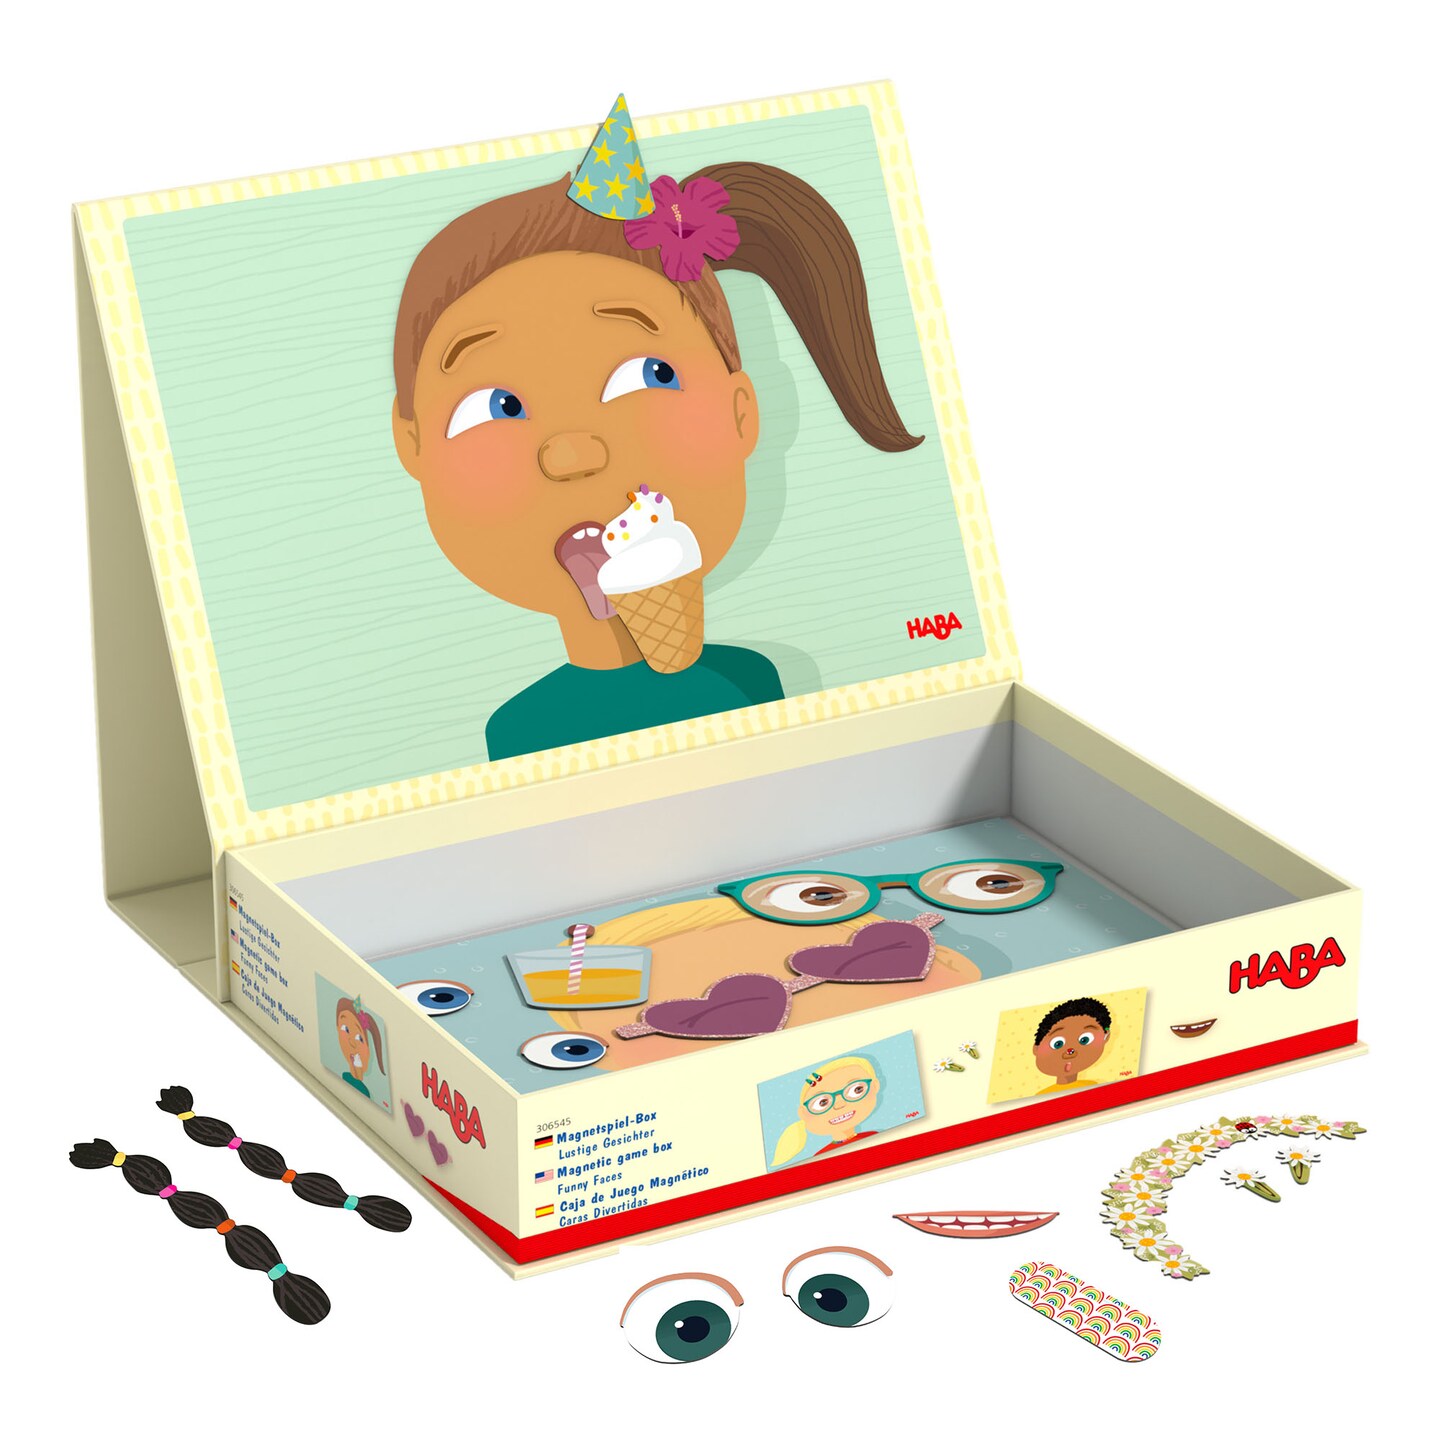 HABA Magnetic Game Box Funny Faces - 3 Basic Faces to Decorate with 96 Magnetic Pieces in Travel Carrying Case